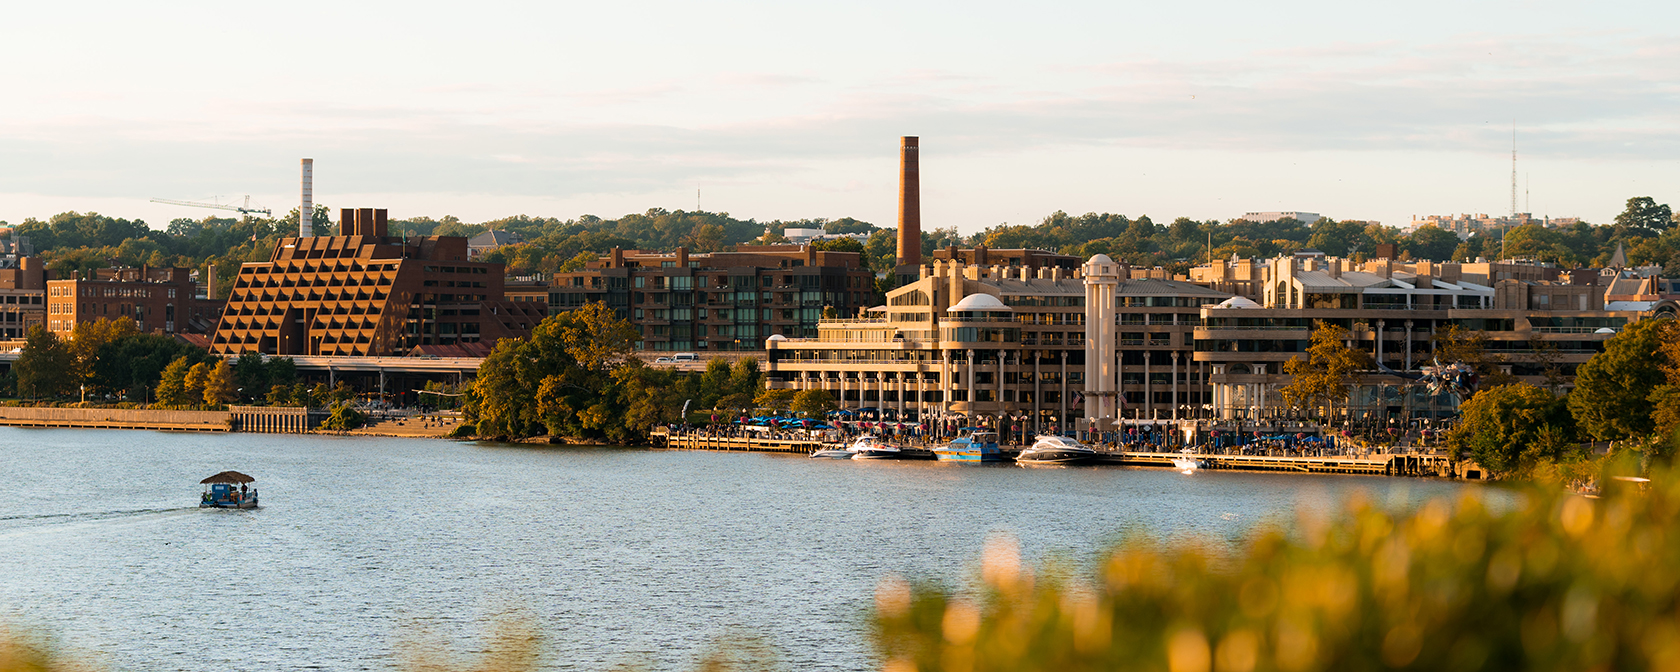 View of the skyline of Georgetown with the Potomac River